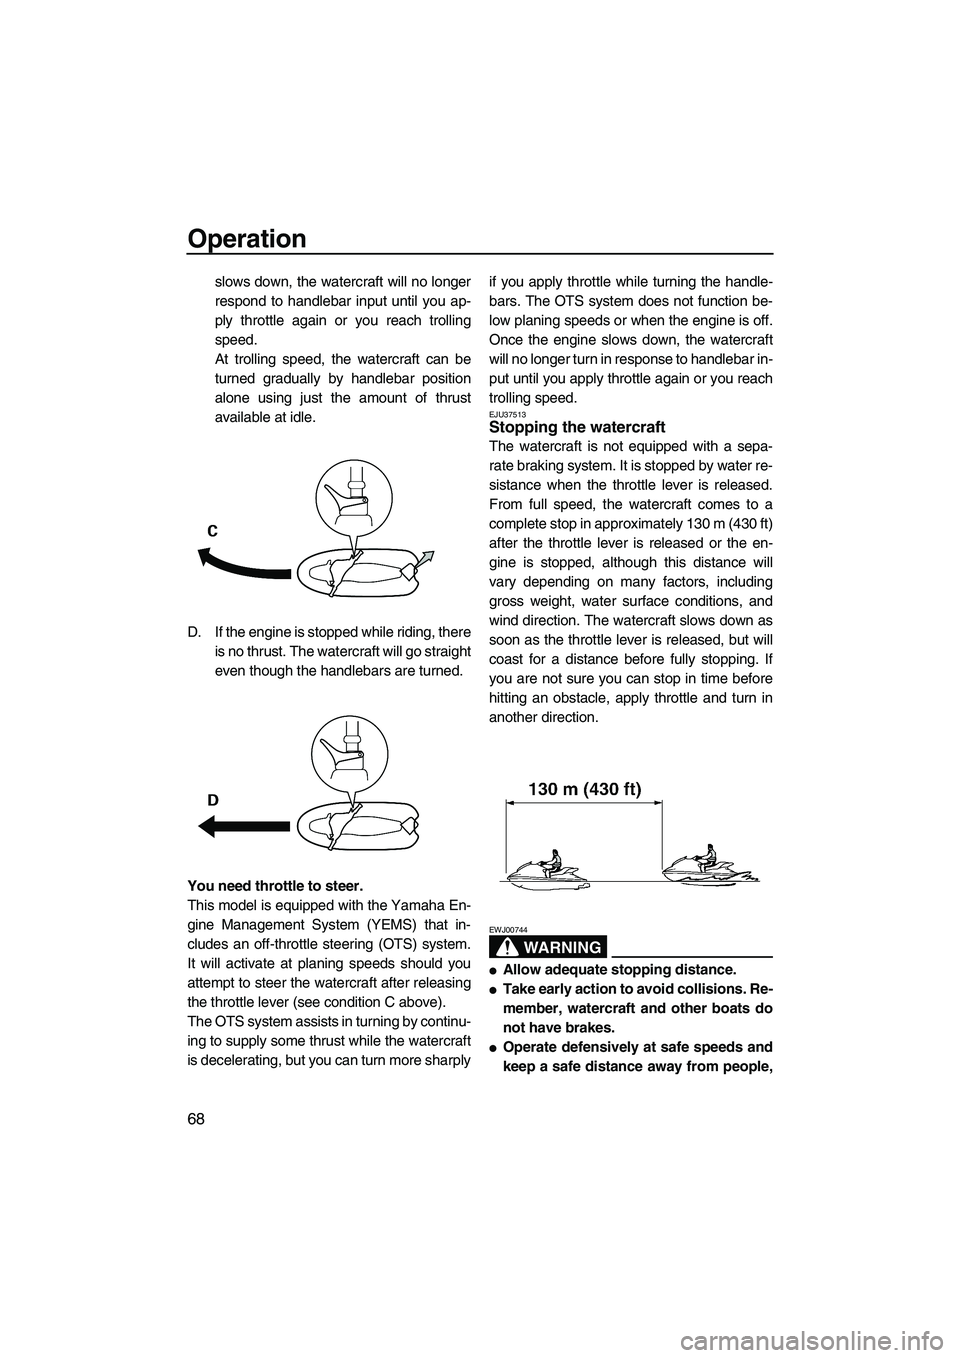 YAMAHA FZR 2012  Owners Manual Operation
68
slows down, the watercraft will no longer
respond to handlebar input until you ap-
ply throttle again or you reach trolling
speed.
At trolling speed, the watercraft can be
turned graduall